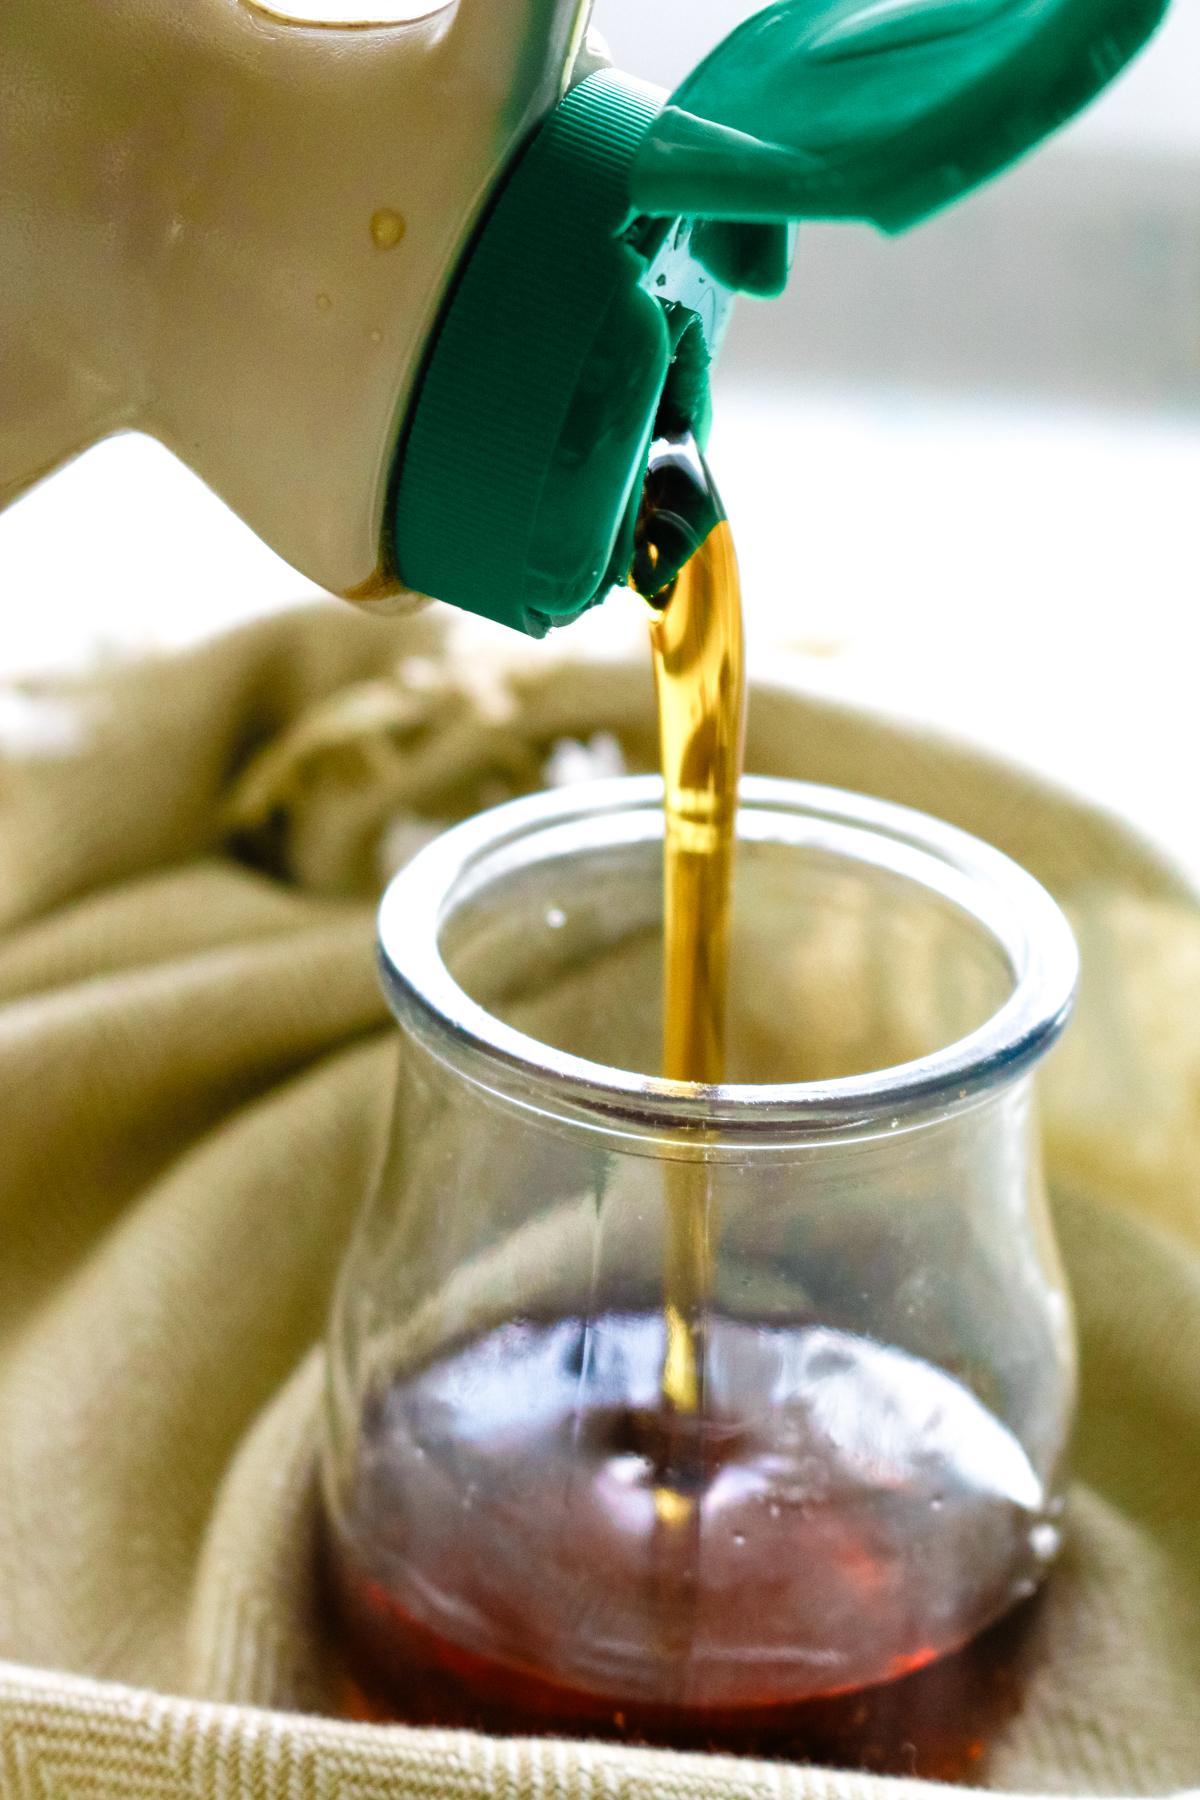 maple syrup being poured into a small glass jar.